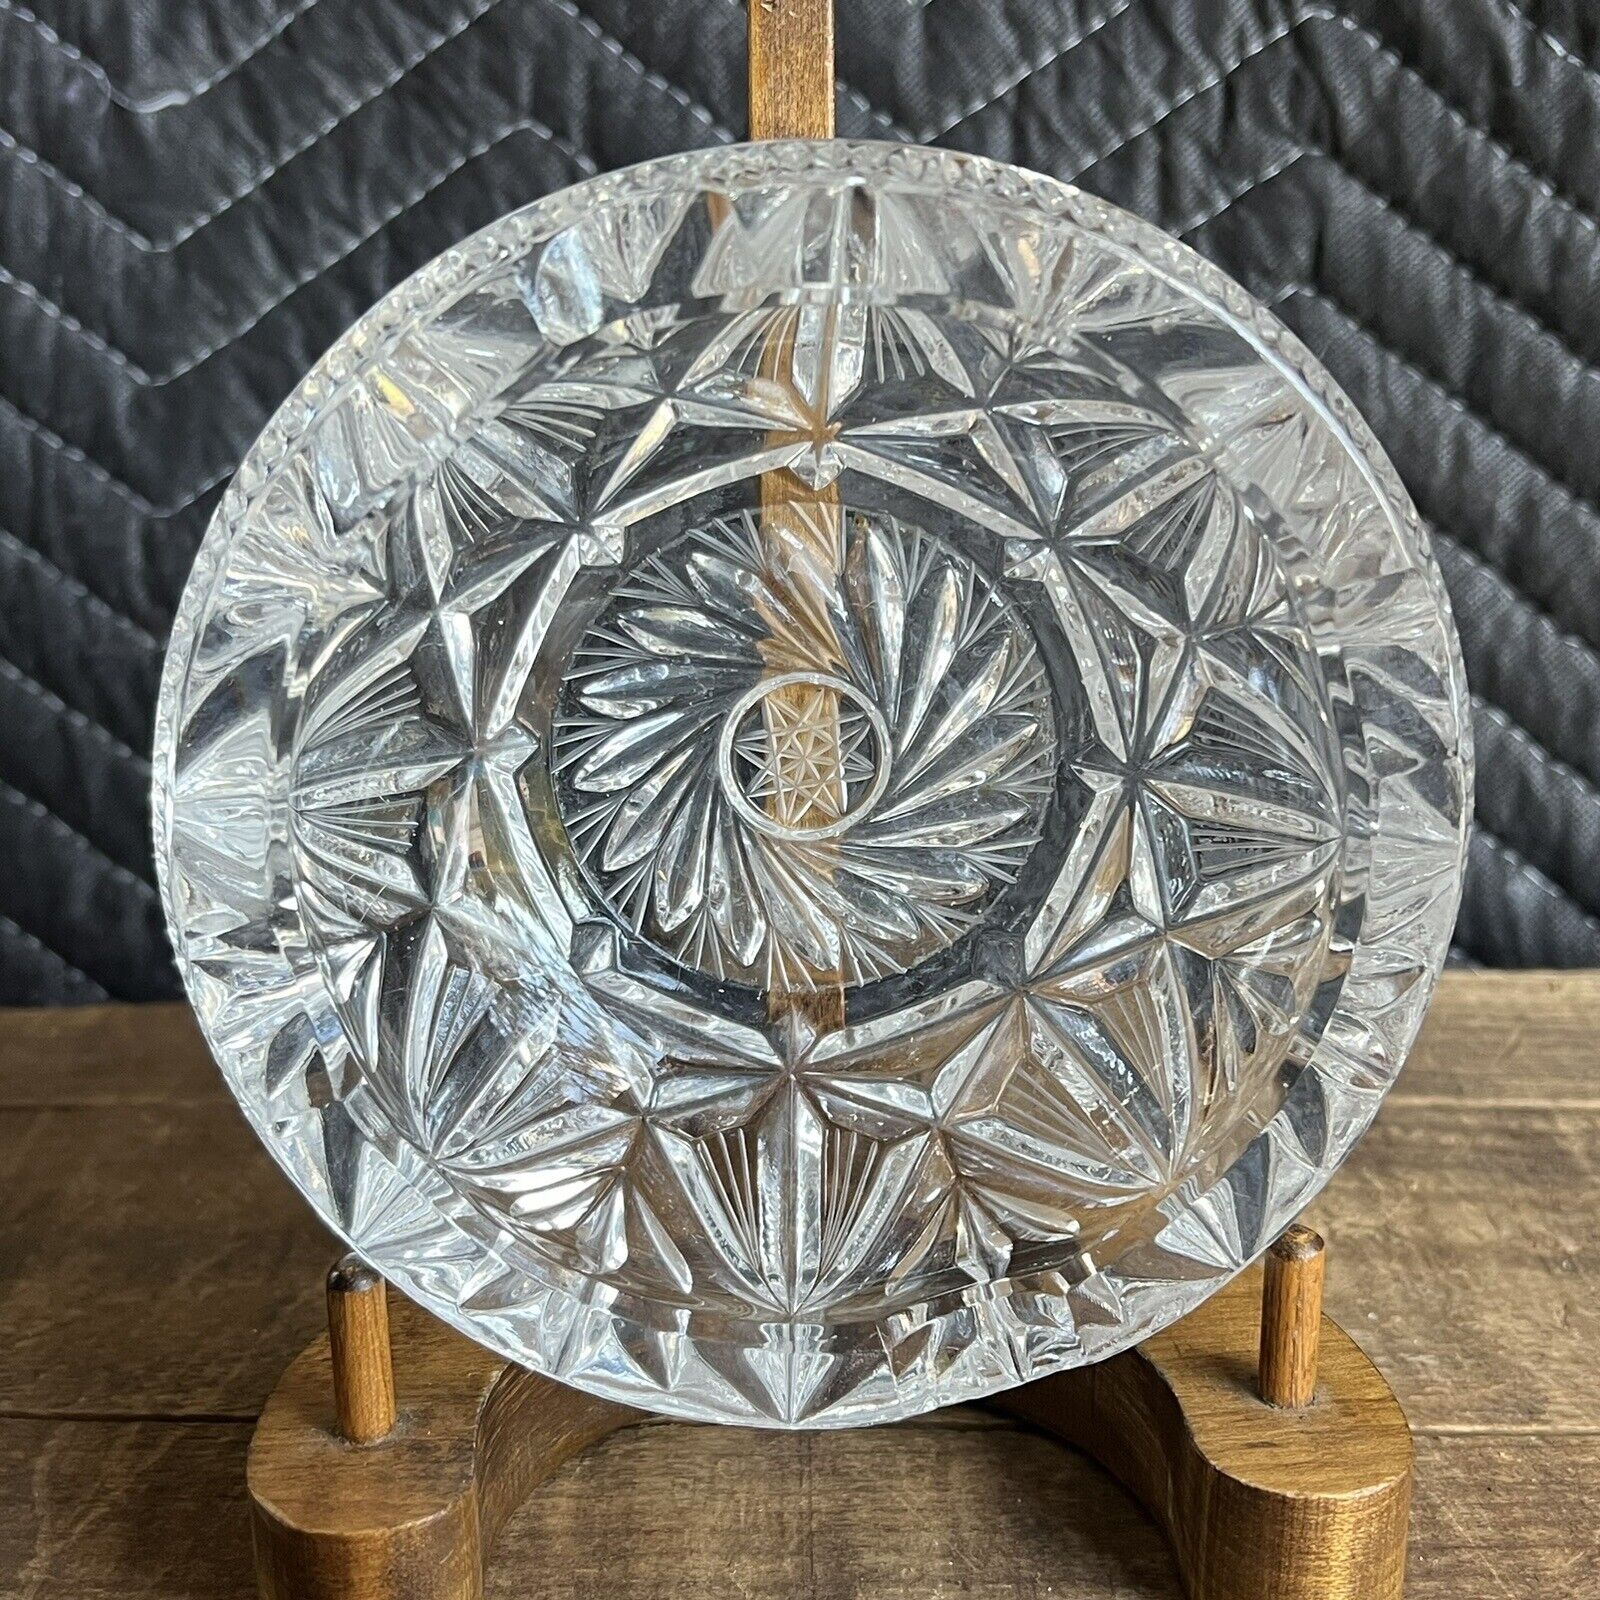 STUNNING 5 1/2 Inch Vintage Geometric Cut Etched Sparkly Crystal Ashtray 